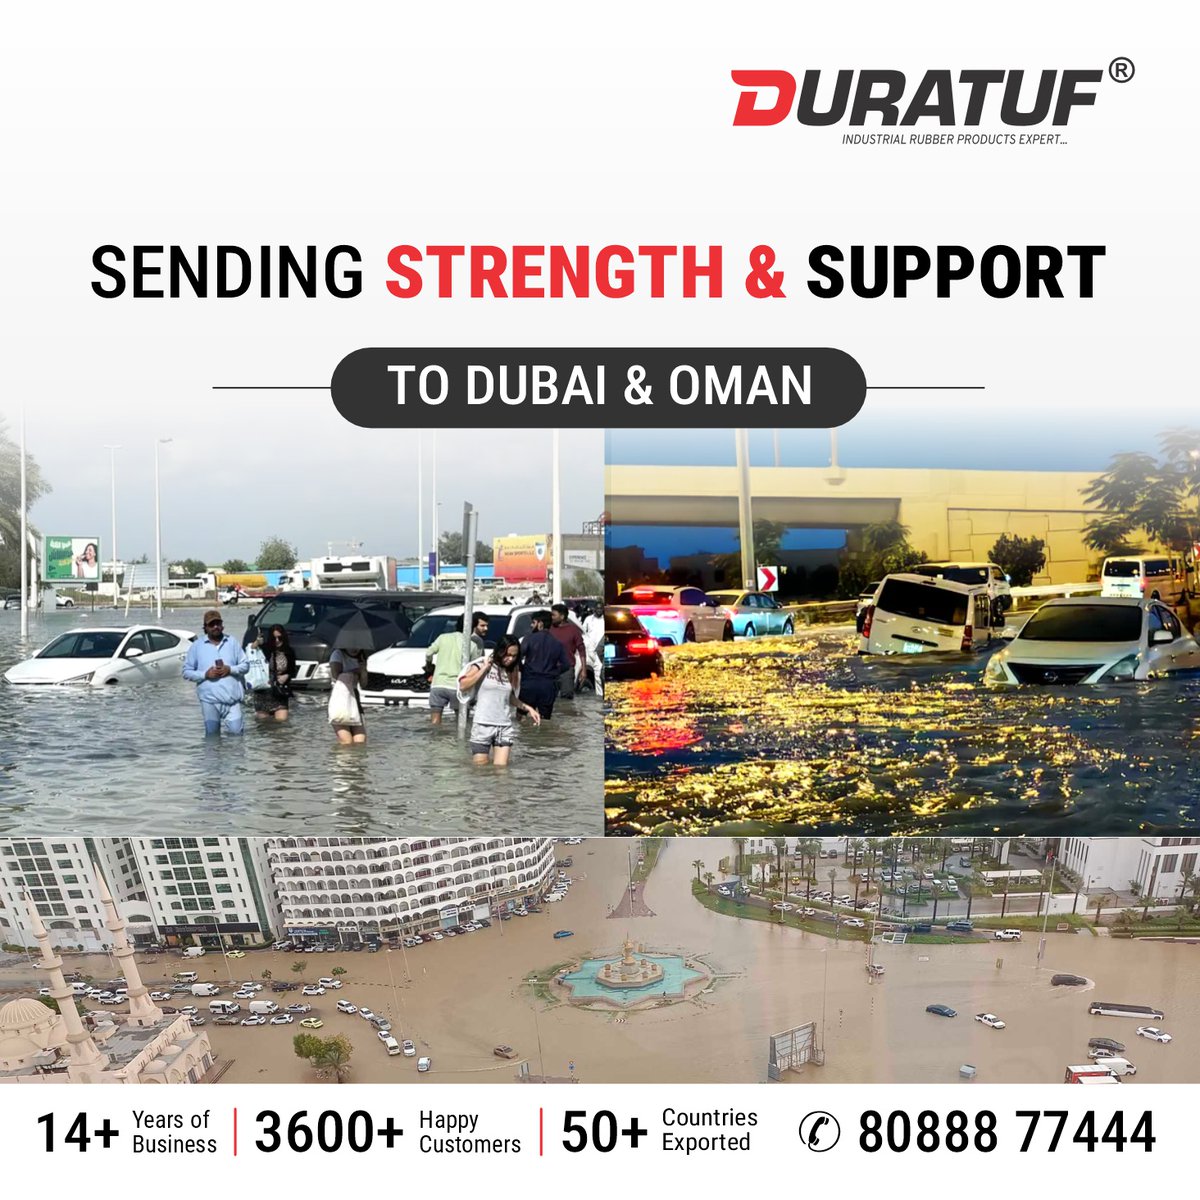 Standing together in solidarity with those affected by the recent floods in Dubai and Oman. Our thoughts are with everyone impacted by this natural disaster.

 Let's unite to support relief efforts and rebuild communities. 

#DubaiFloods #OmanFloods #UnityInAdversity #duratuf